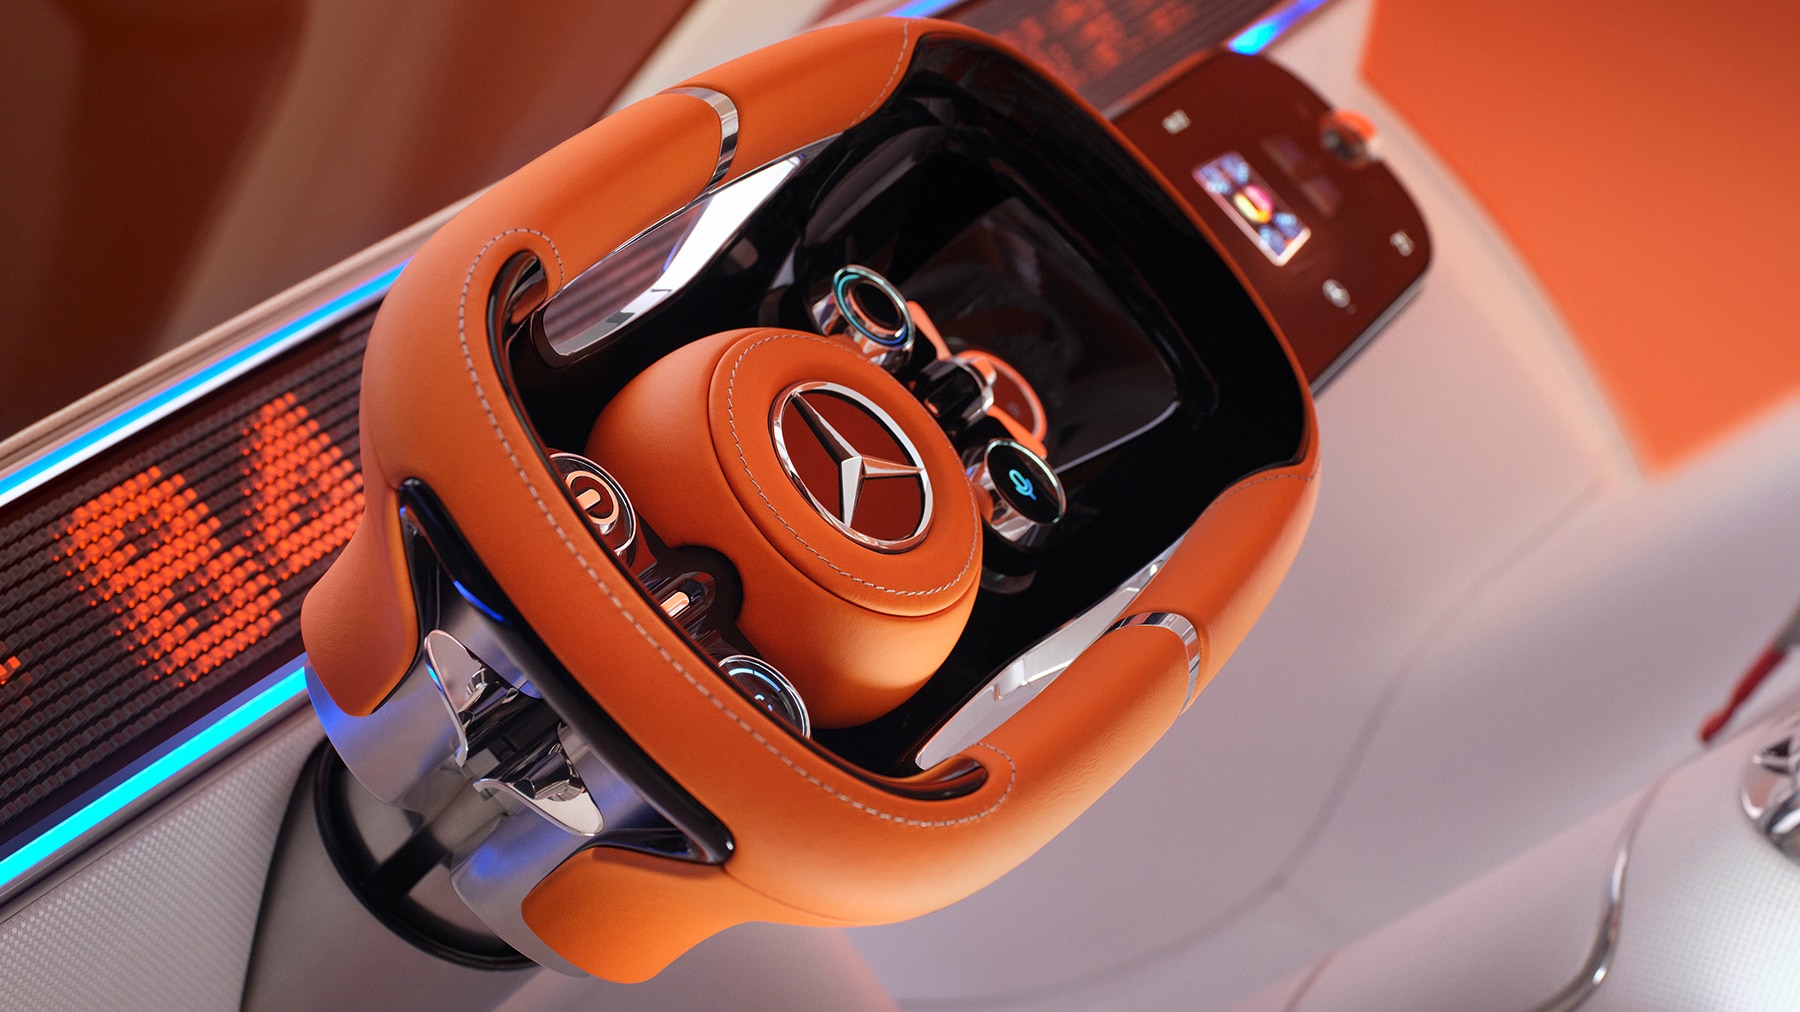 New steering wheel technology for more safety